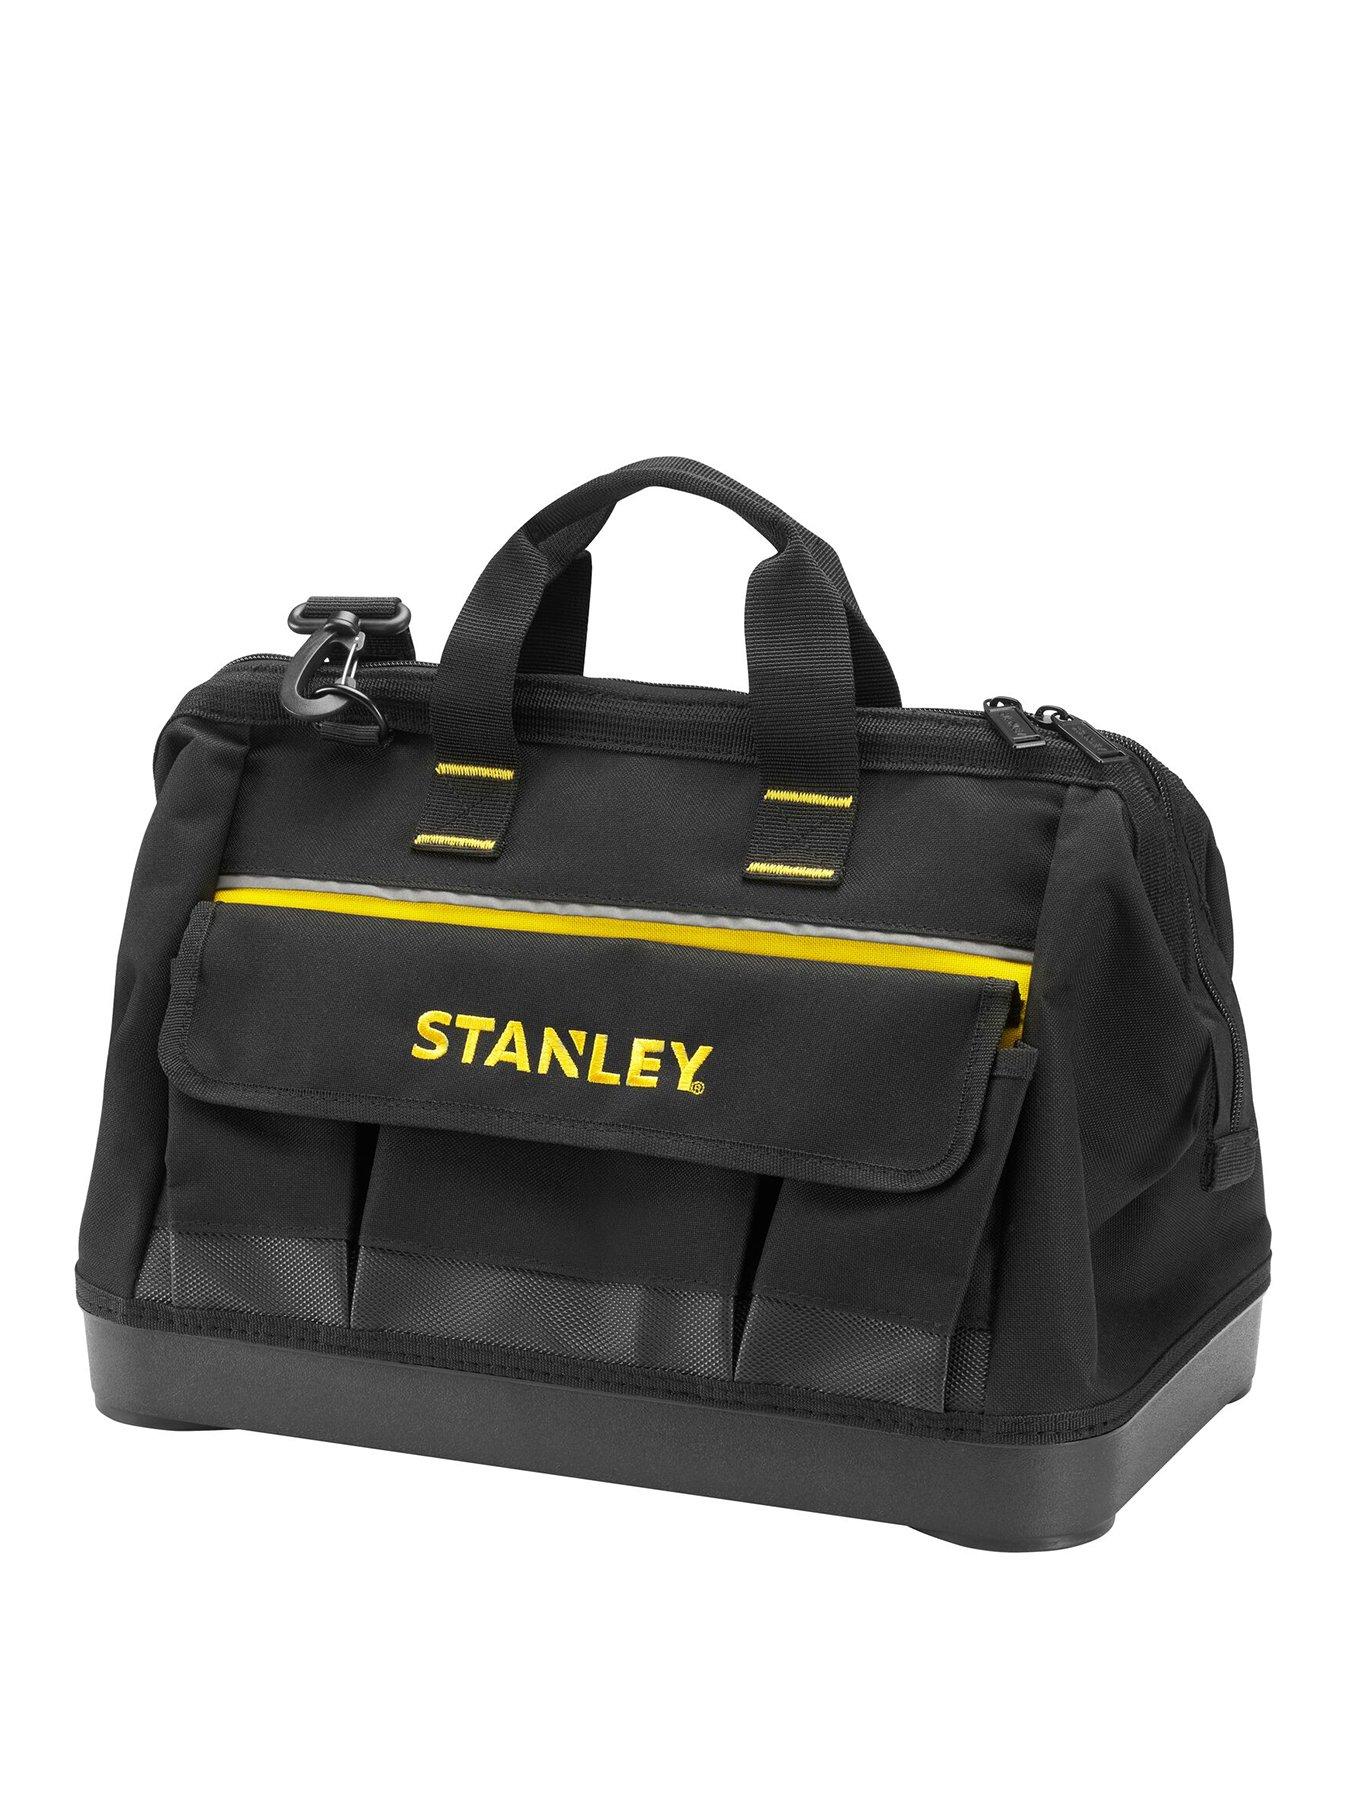 Stanley FatMax 1-96-183 Open Mouth Tool Bag 16inch Very Ireland